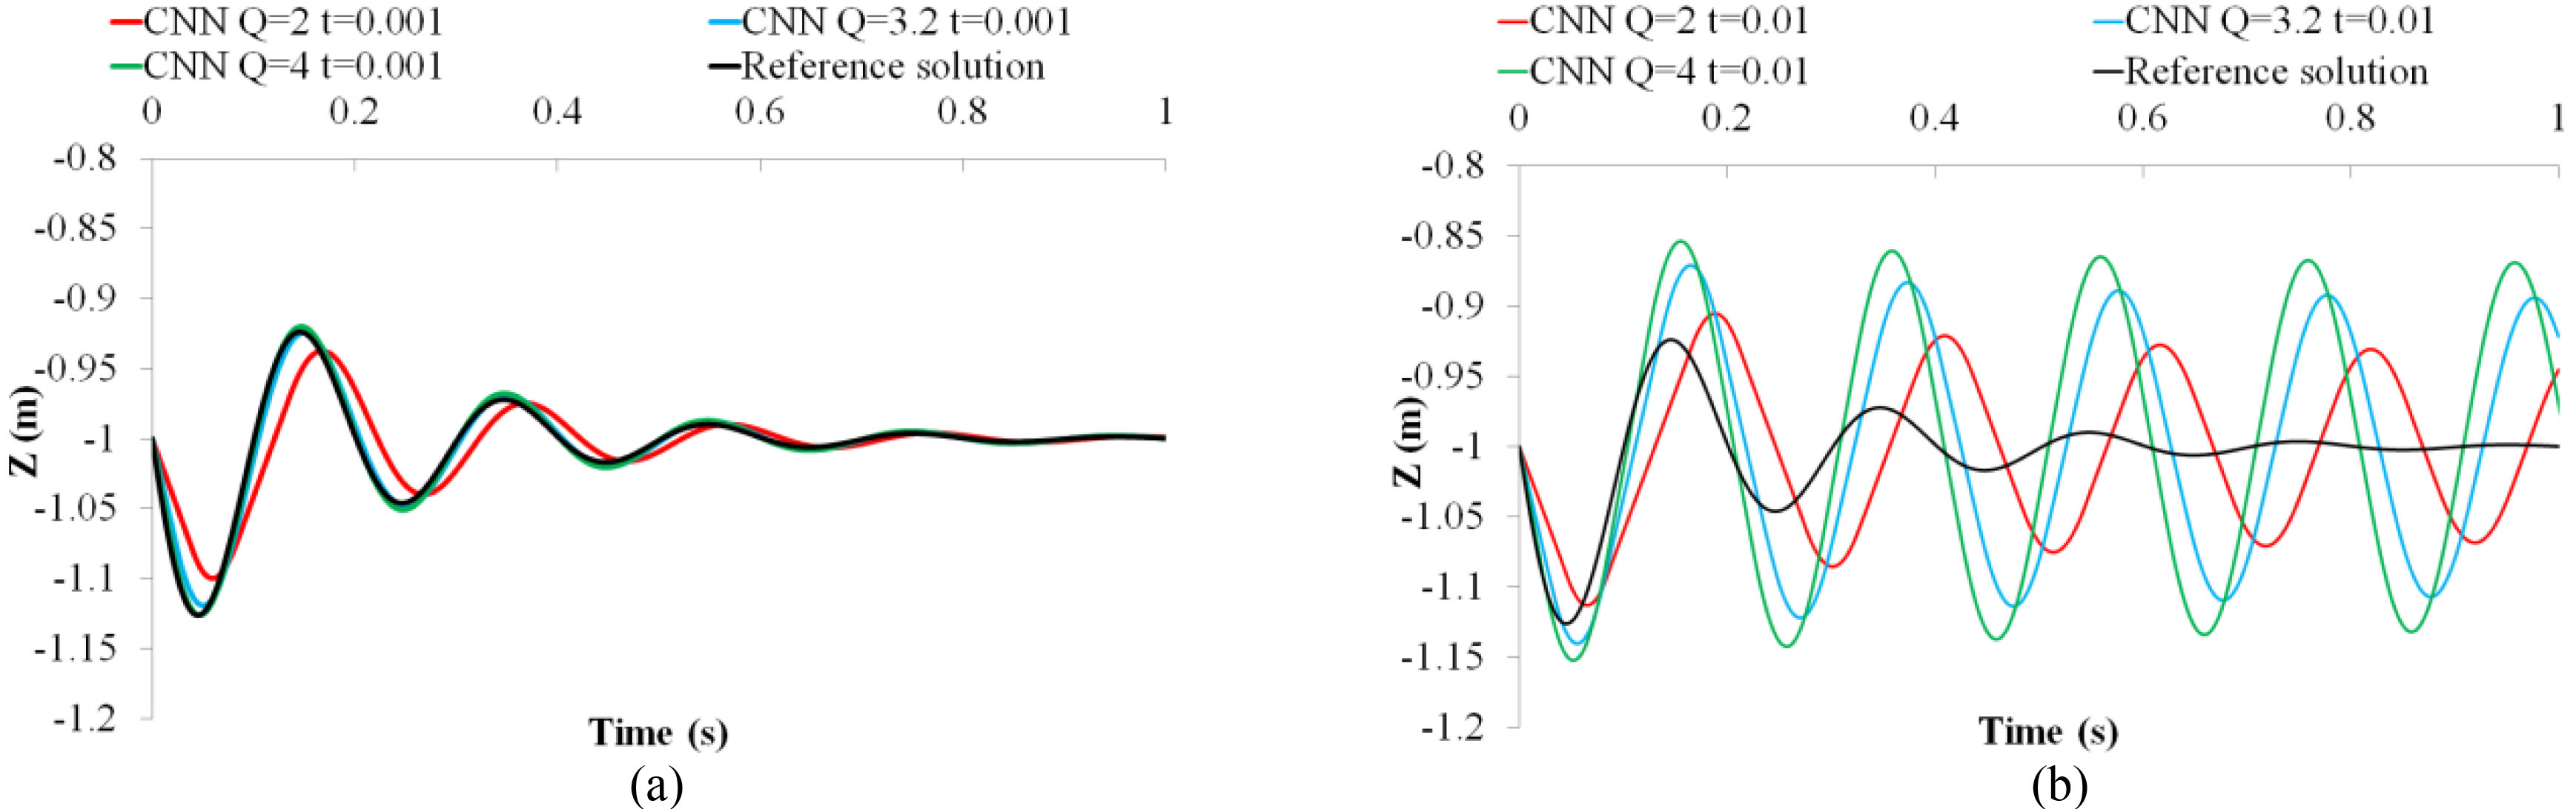 Comparisons between different values of Q in the proposed CNN at (a) a small time step and (b) a large time step.